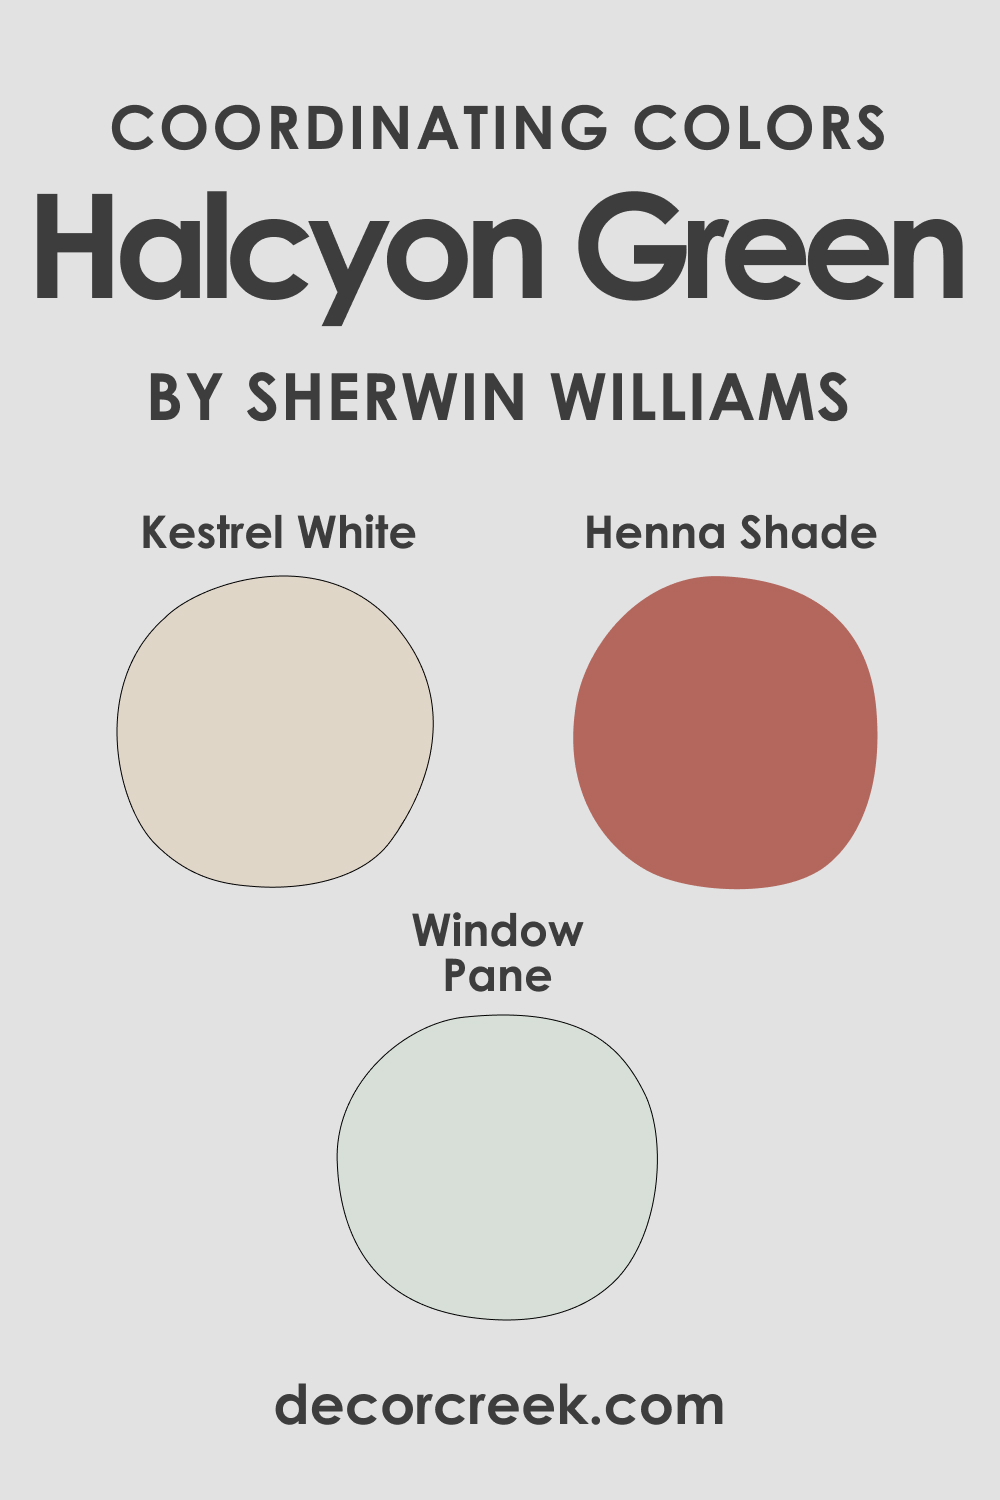 SW Halcyon Green Coordinating Colors